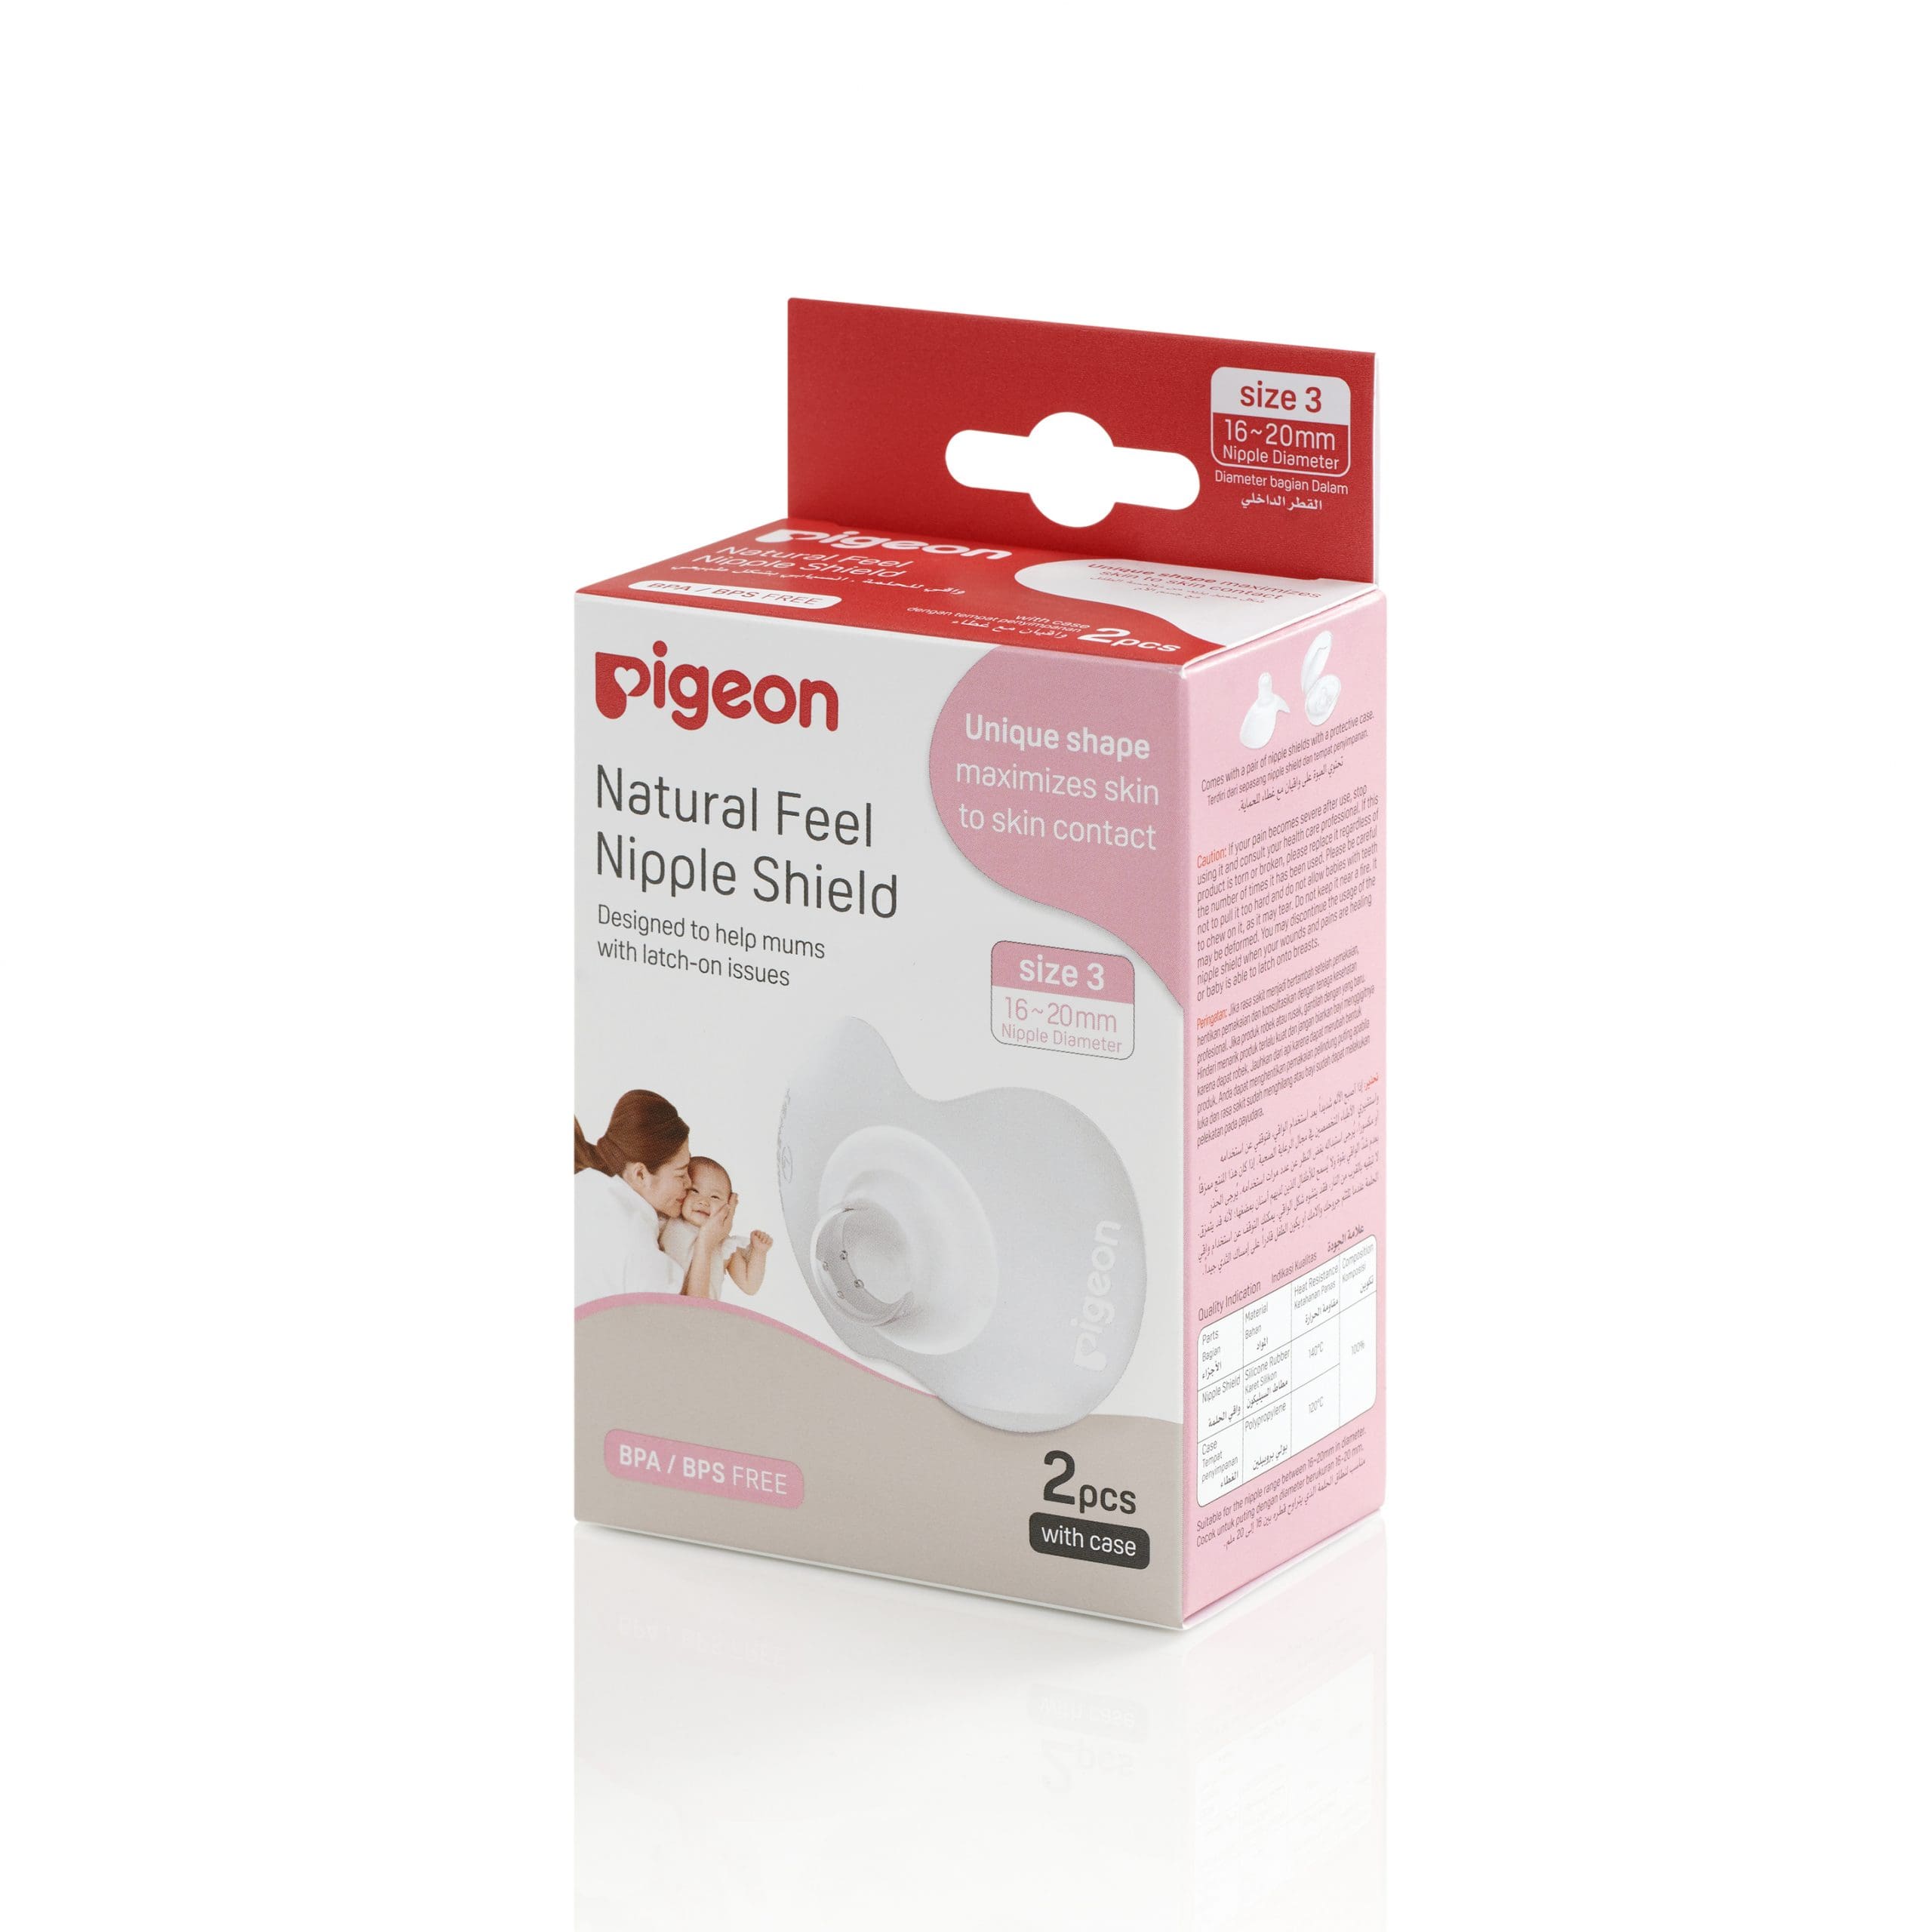 https://pigeon.com.sg/wp-content/uploads/2021/11/79319_Natural-Feel-Nipple-Shield-Size-3L_packaging_right-angled-3000-x-3000-scaled.jpg